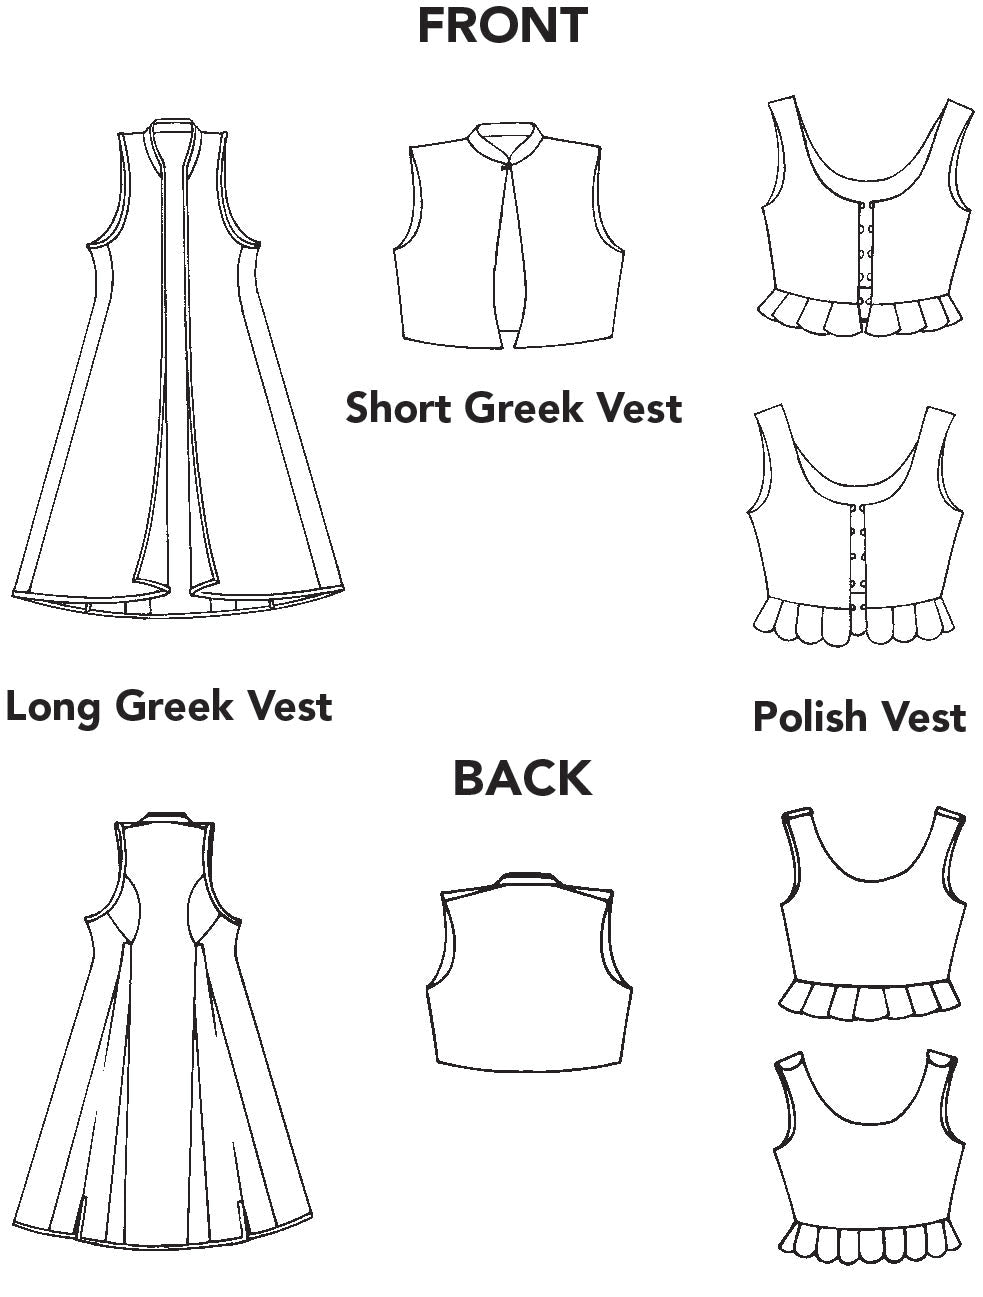 line drawings of front and back of Greek vests and Polish vest